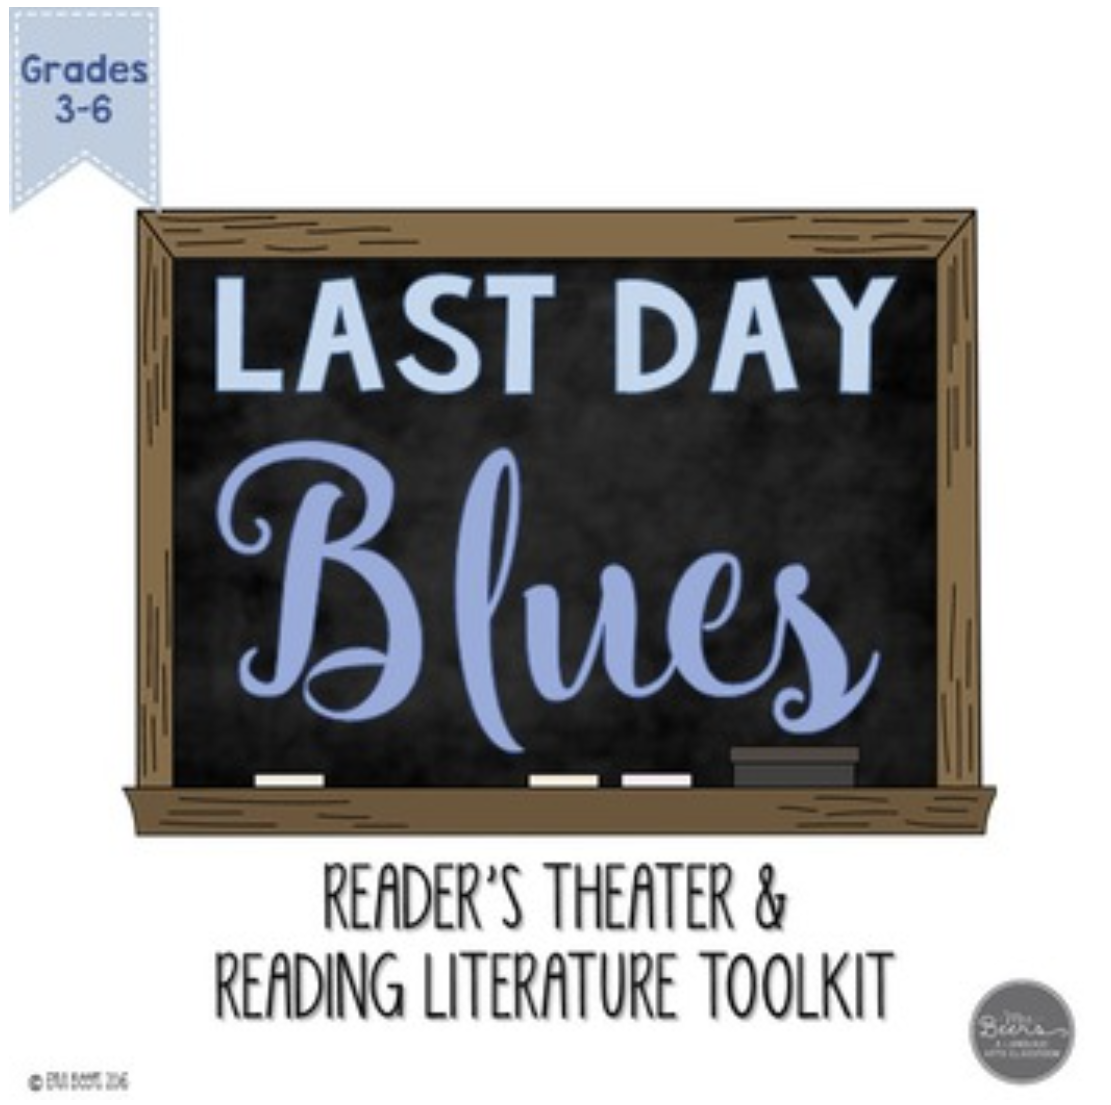 Reader's Theater for Middle School